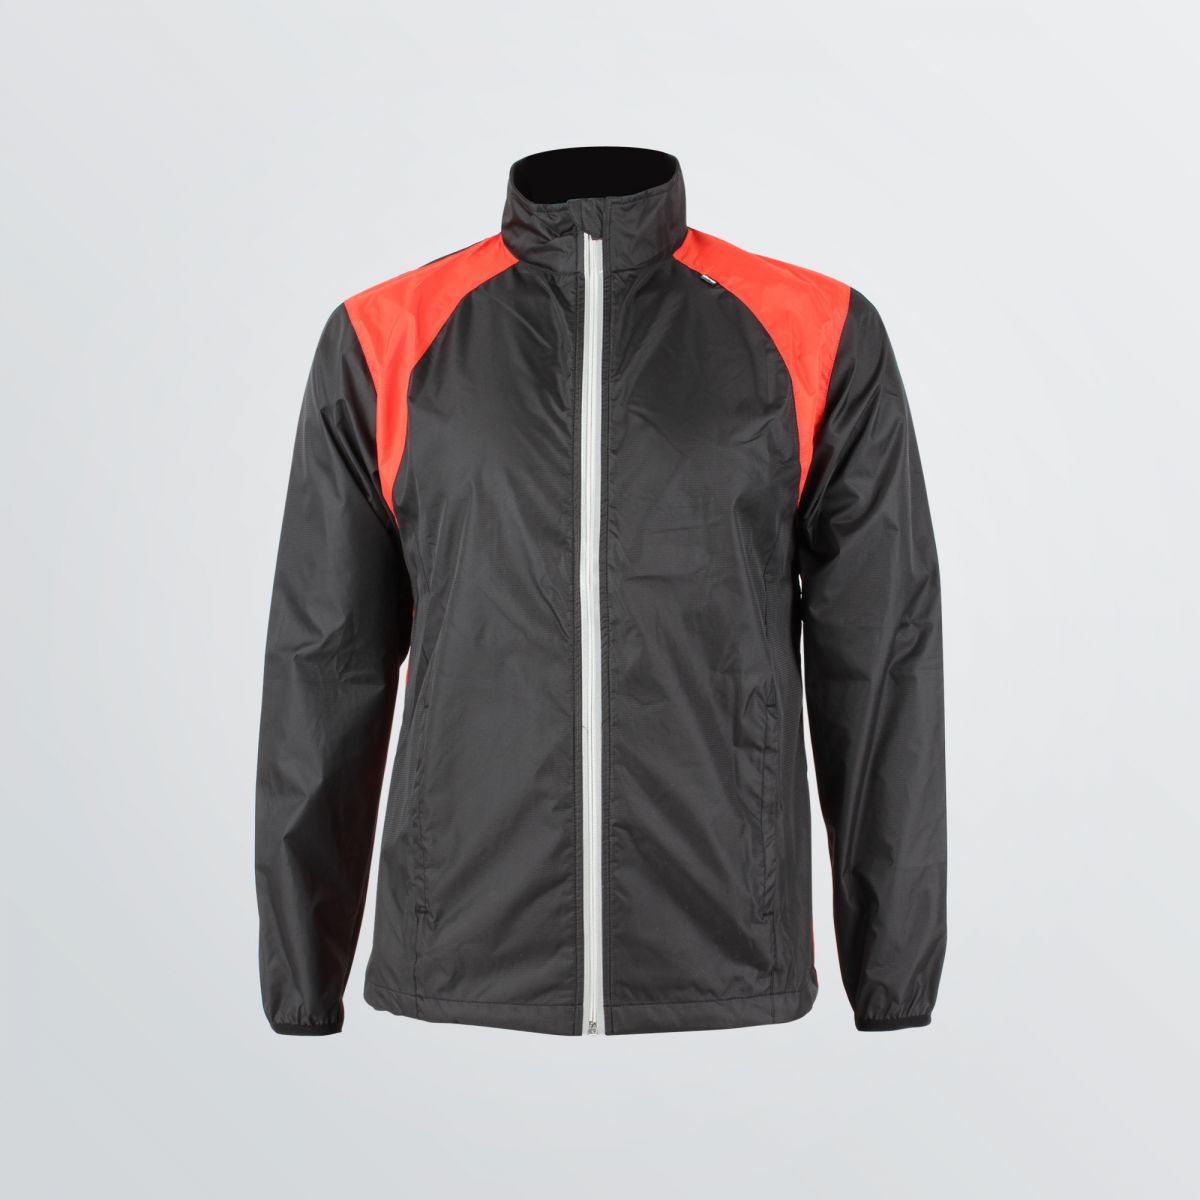 bi-coloured Cross Sport Jacket made of wind resistant functional material for customisation depicted as a  product example in black and red colour